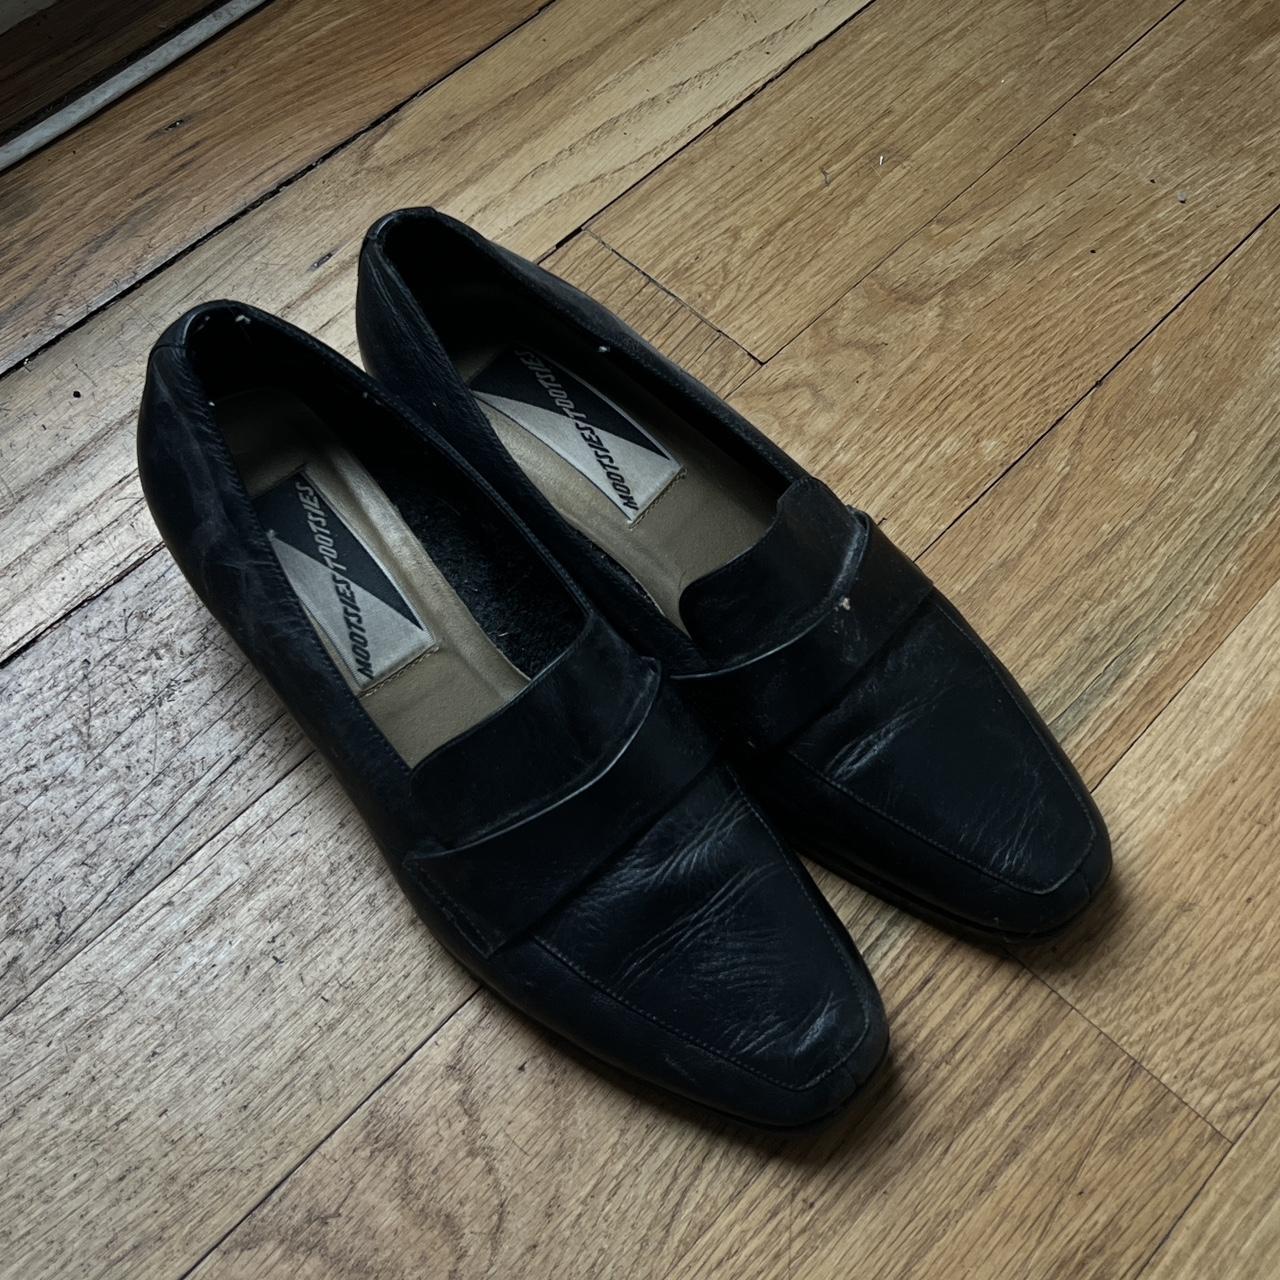 Vintage leather loafer slippers!! These are super... - Depop